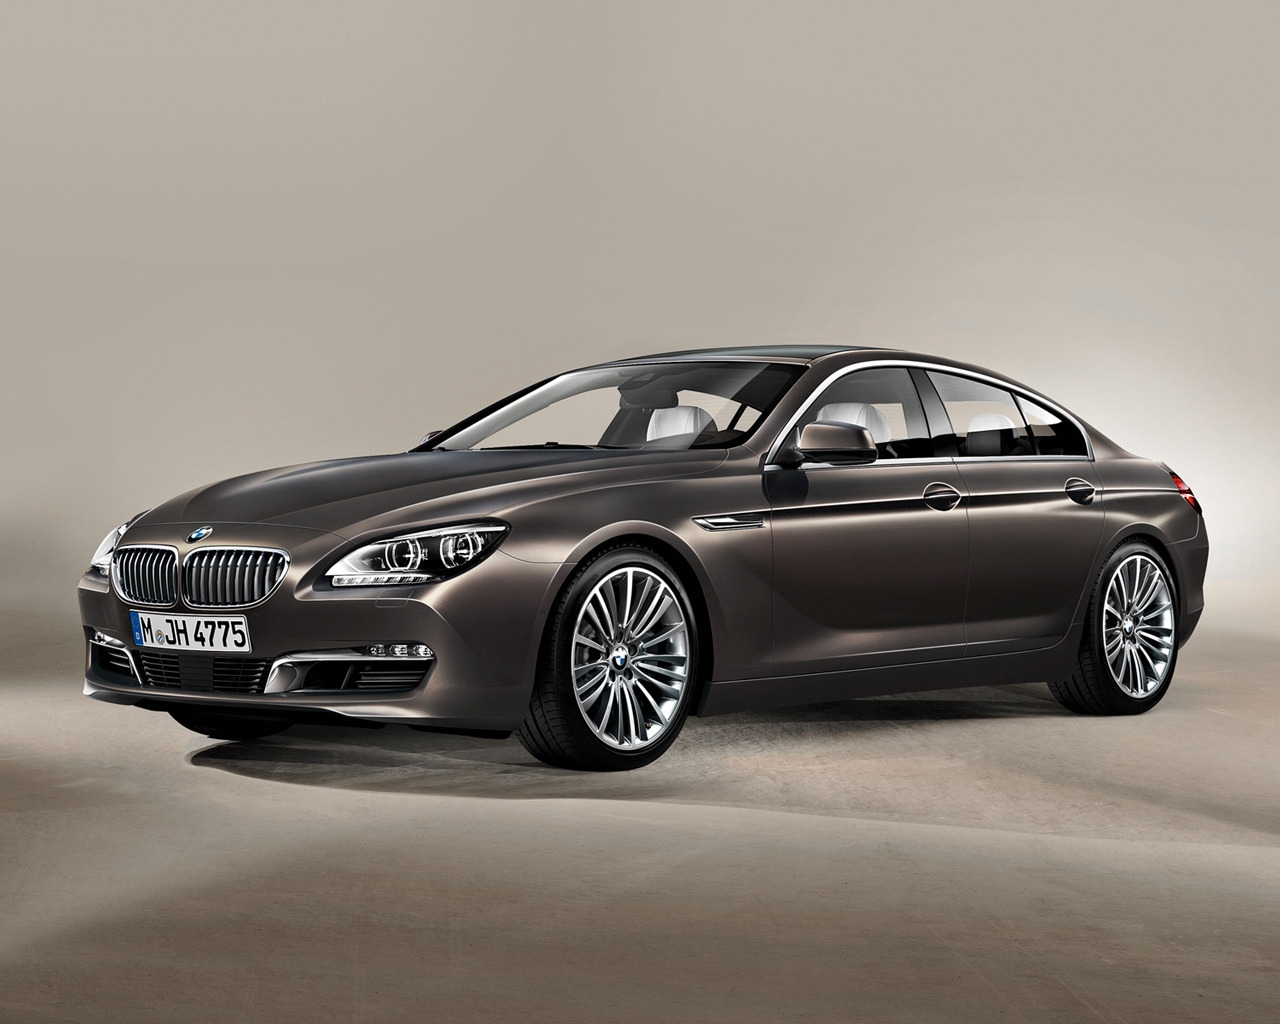 2013 BMW 6 Series Gran Coupe Studio for 1280 x 1024 resolution